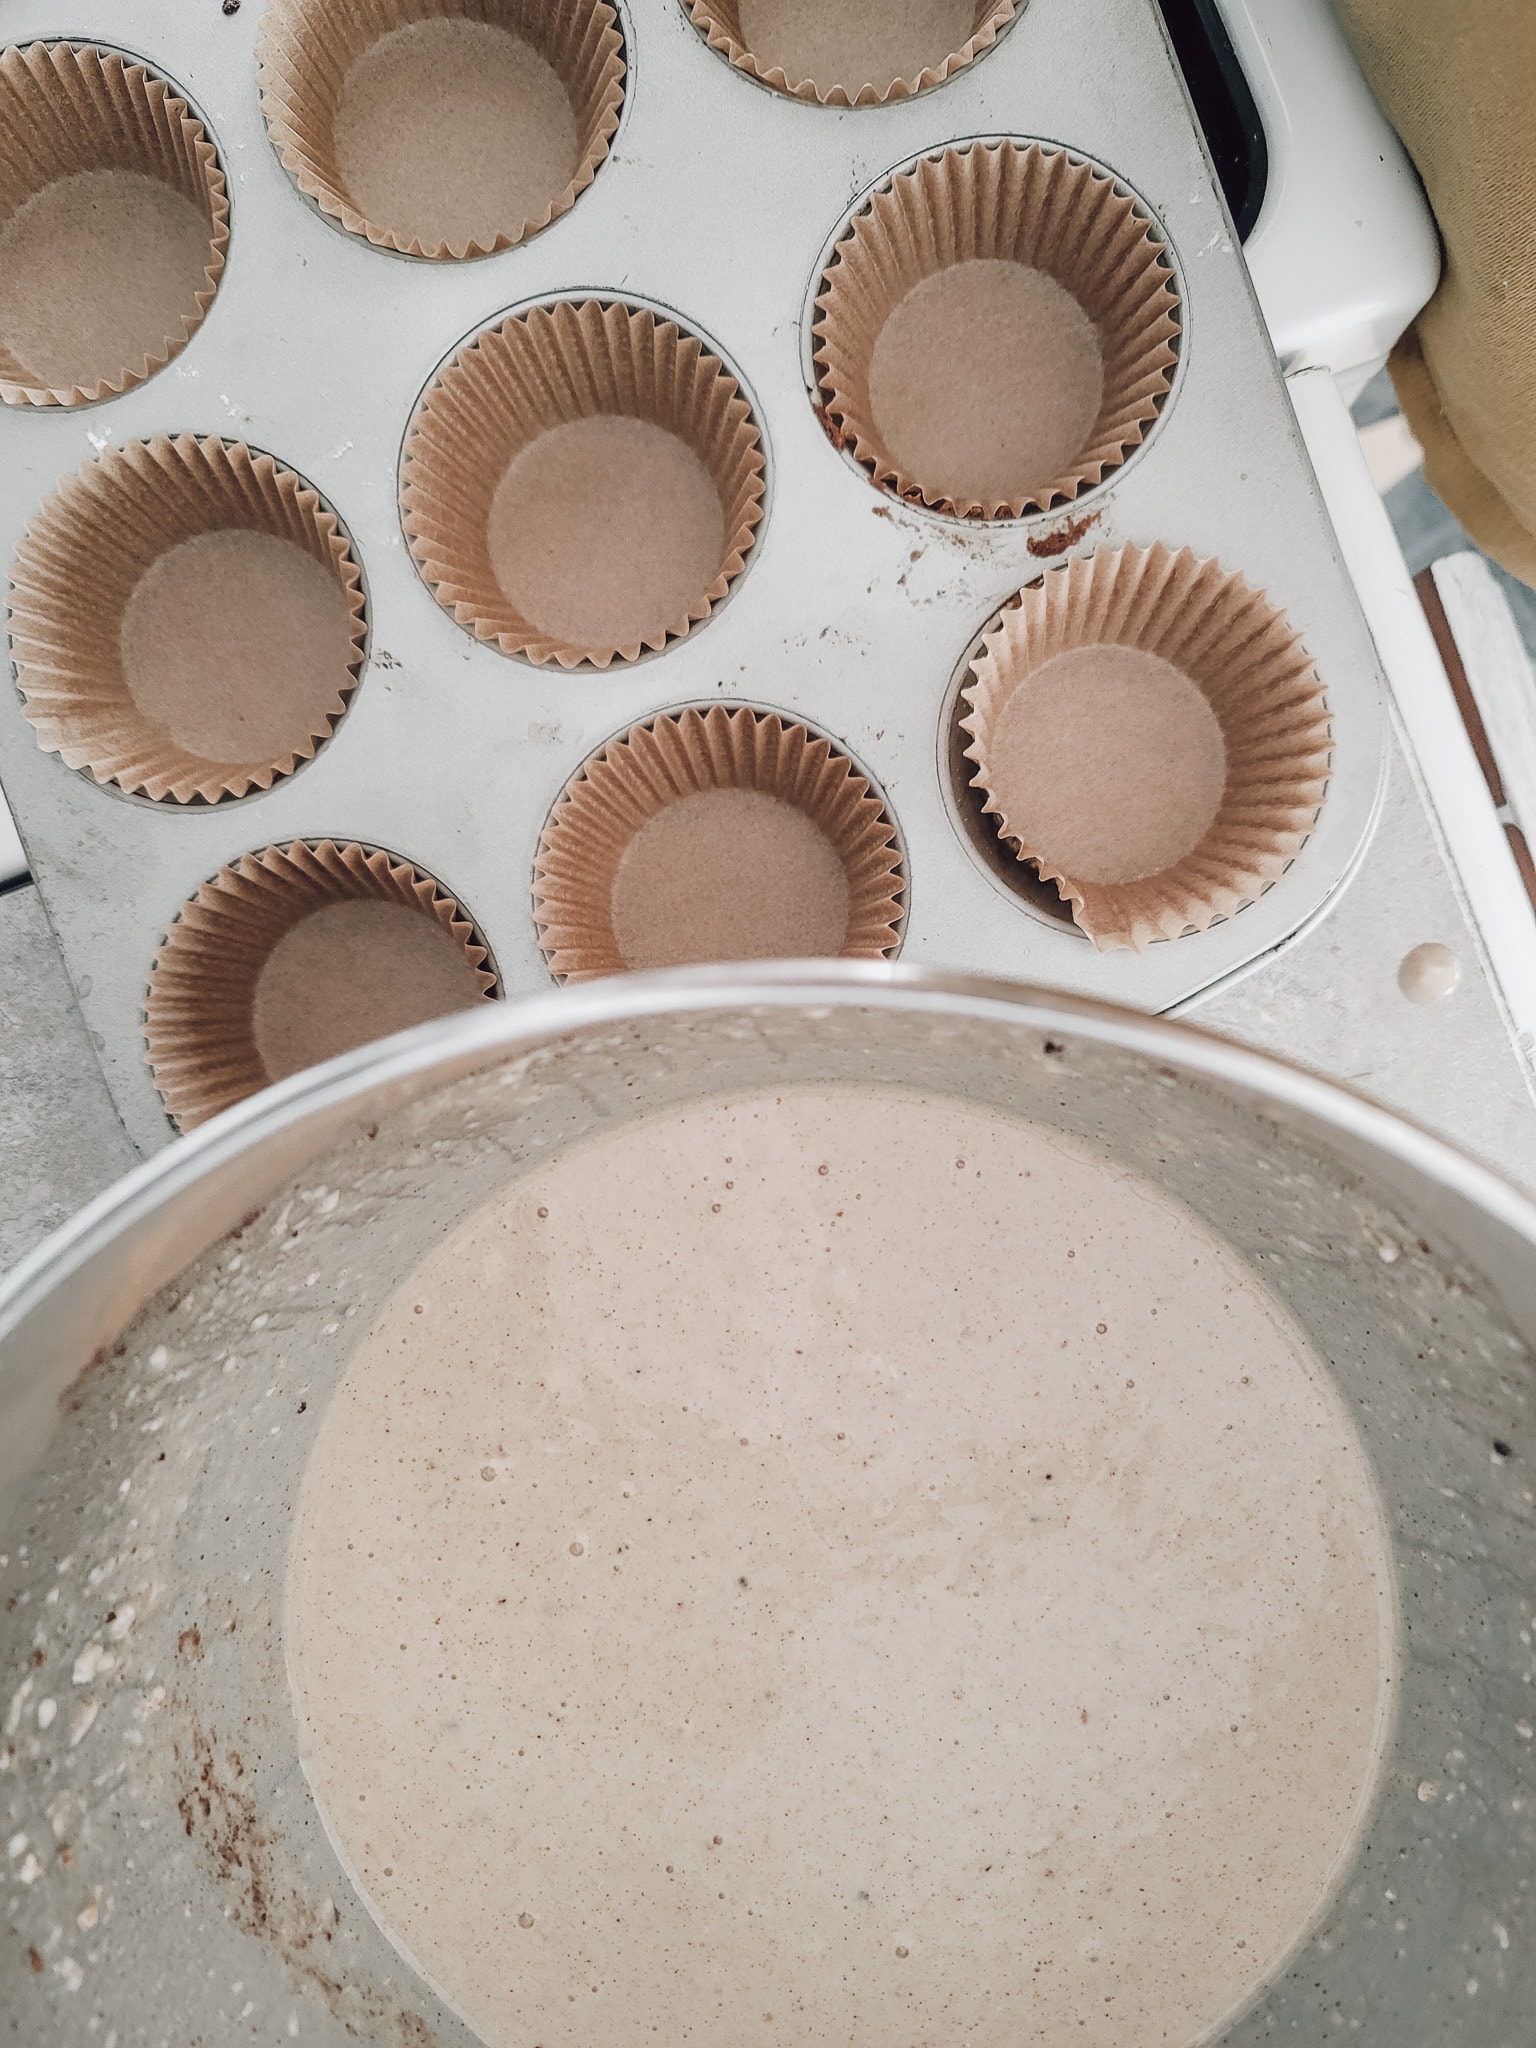 Sourdough Cinnamon muffins. Spoon batter into muffin cupcakes/muffin liners. Only fill ¾ of the way full. 